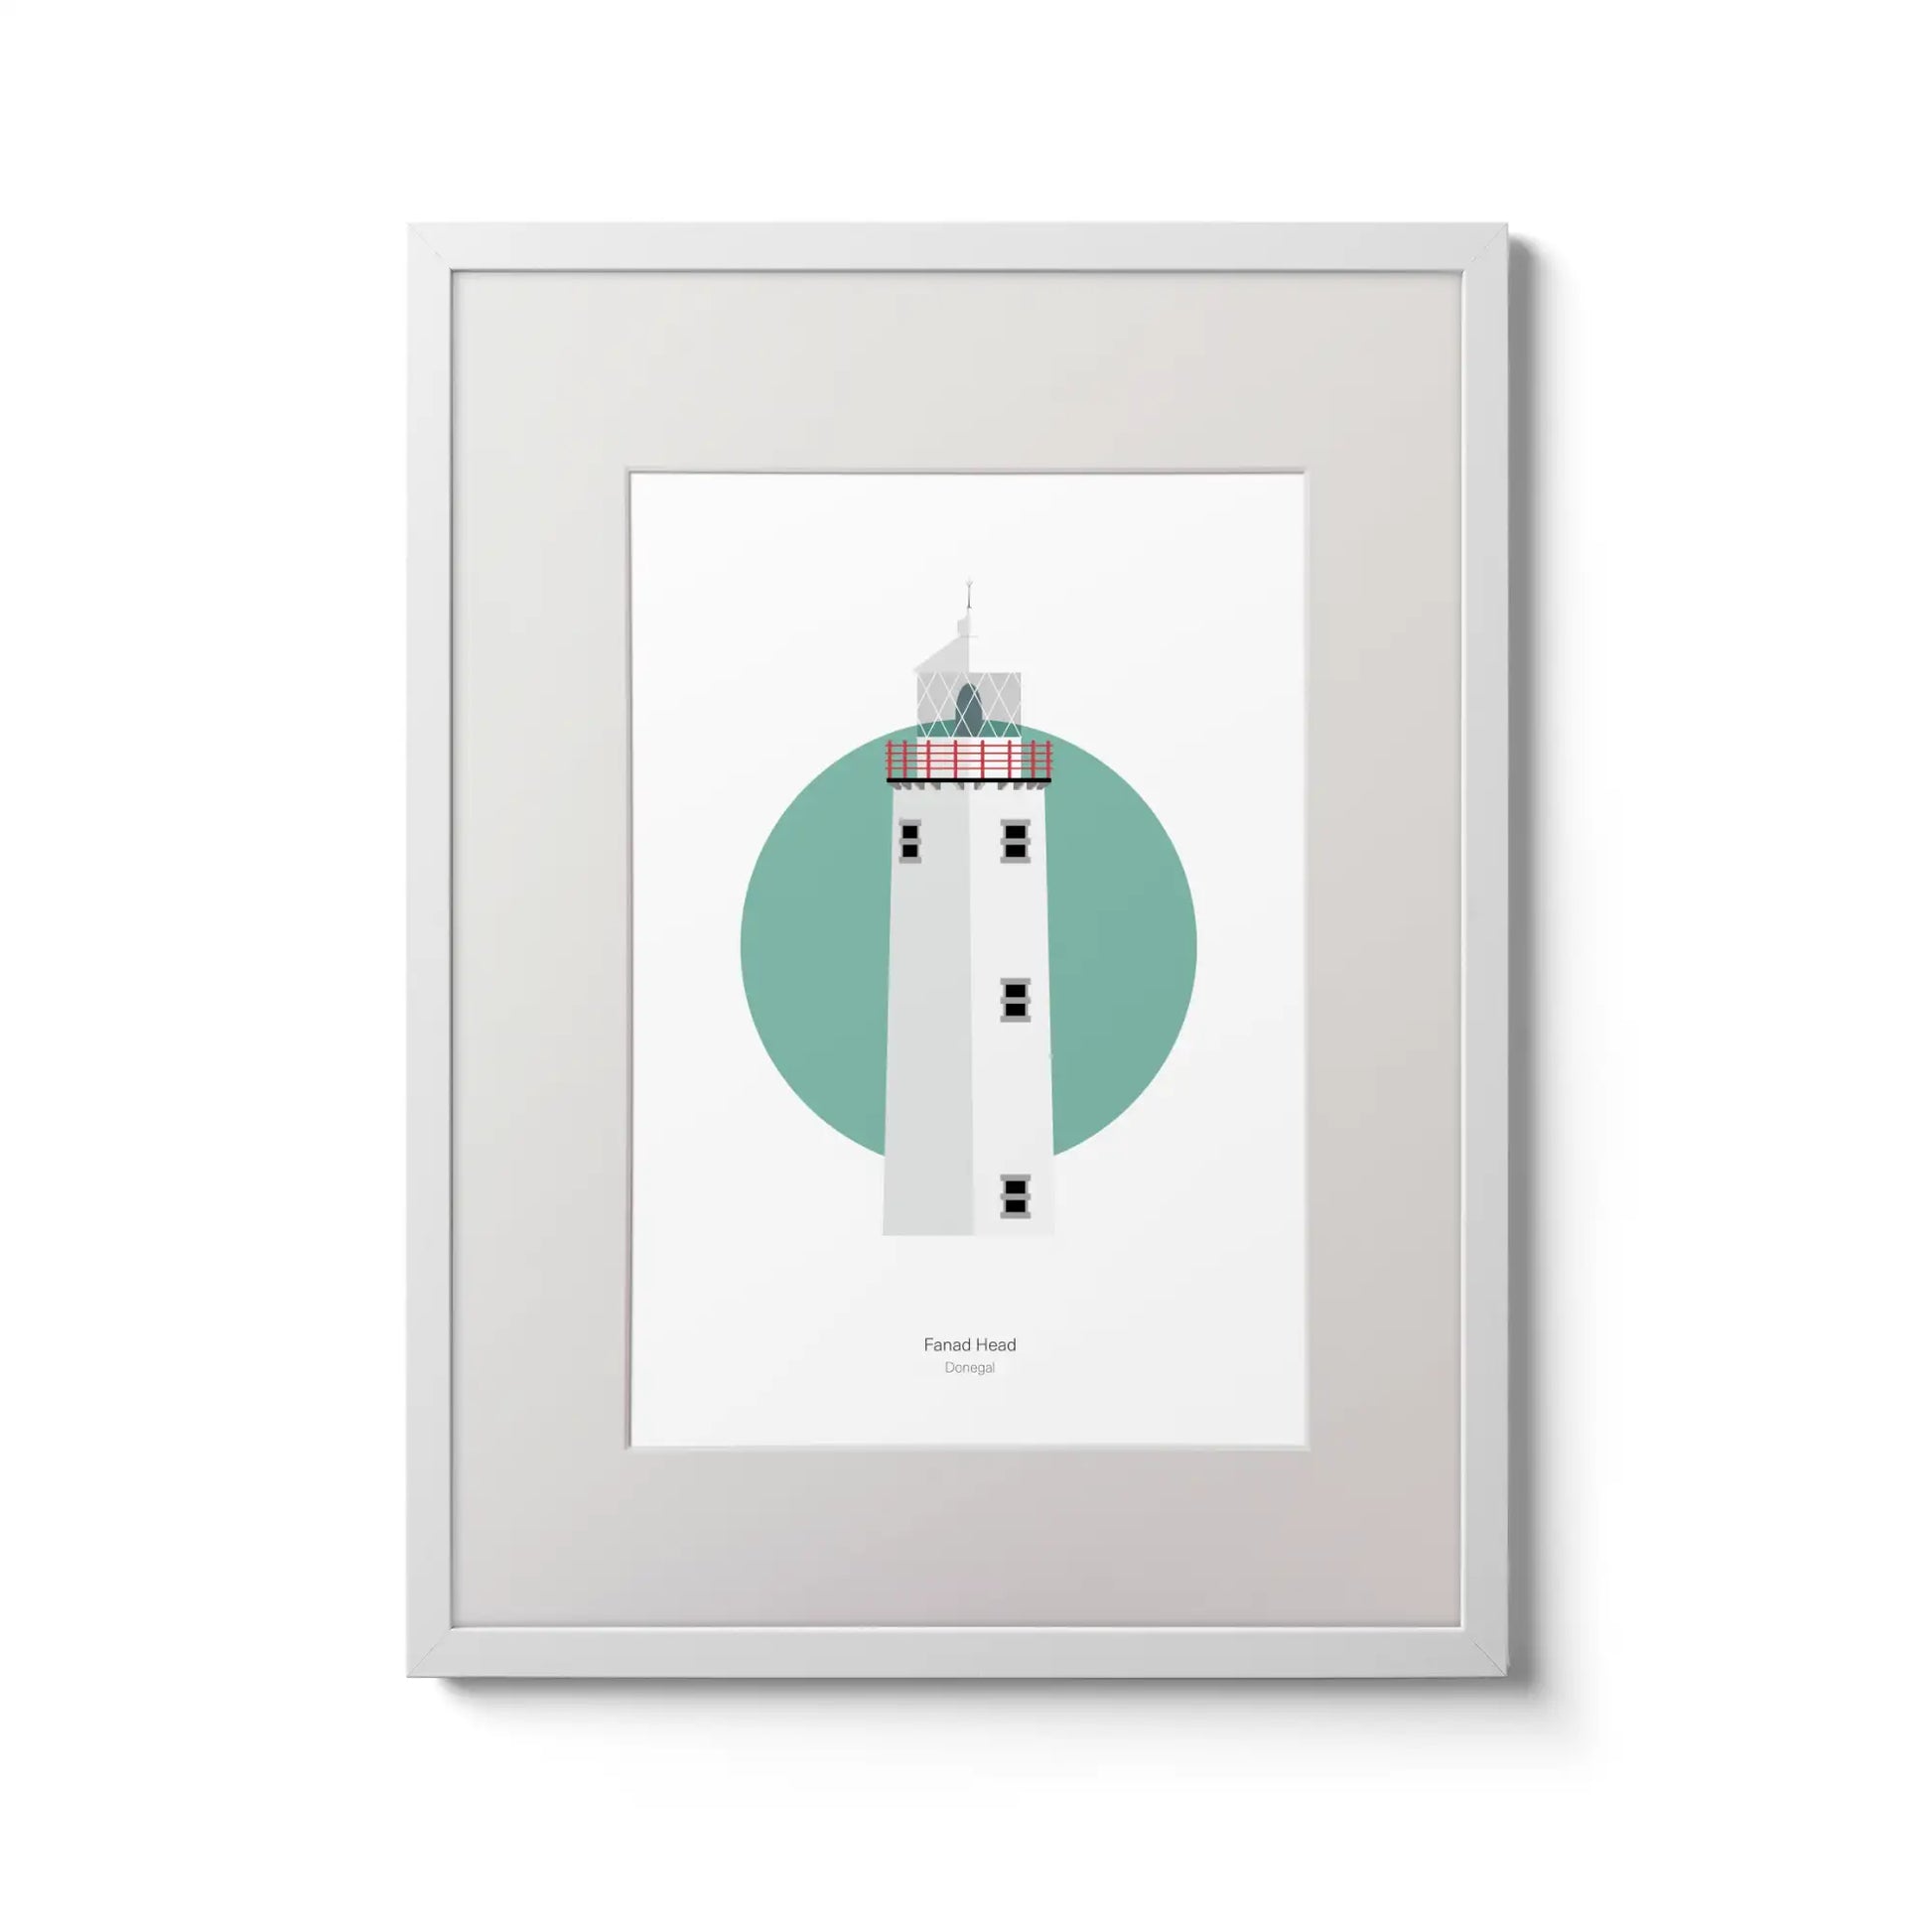 Illustration of Fanad Head lighthouse on a white background inside light blue square,  in a white frame measuring 30x40cm.